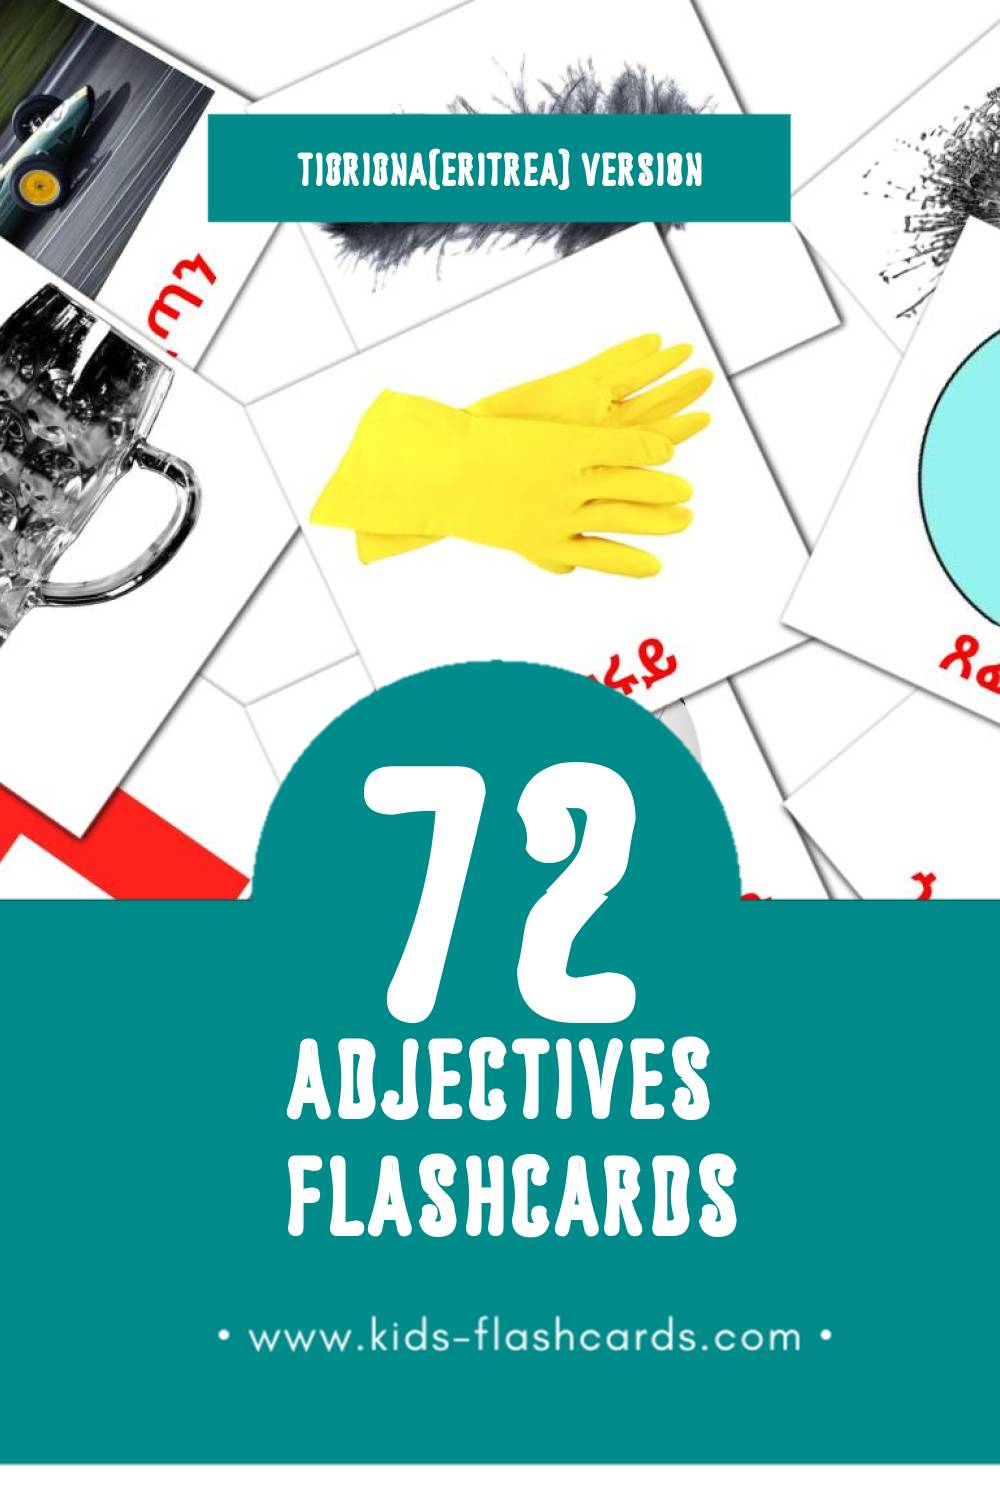 Visual ቅጽል Flashcards for Toddlers (72 cards in Tigrigna(Eritrea))